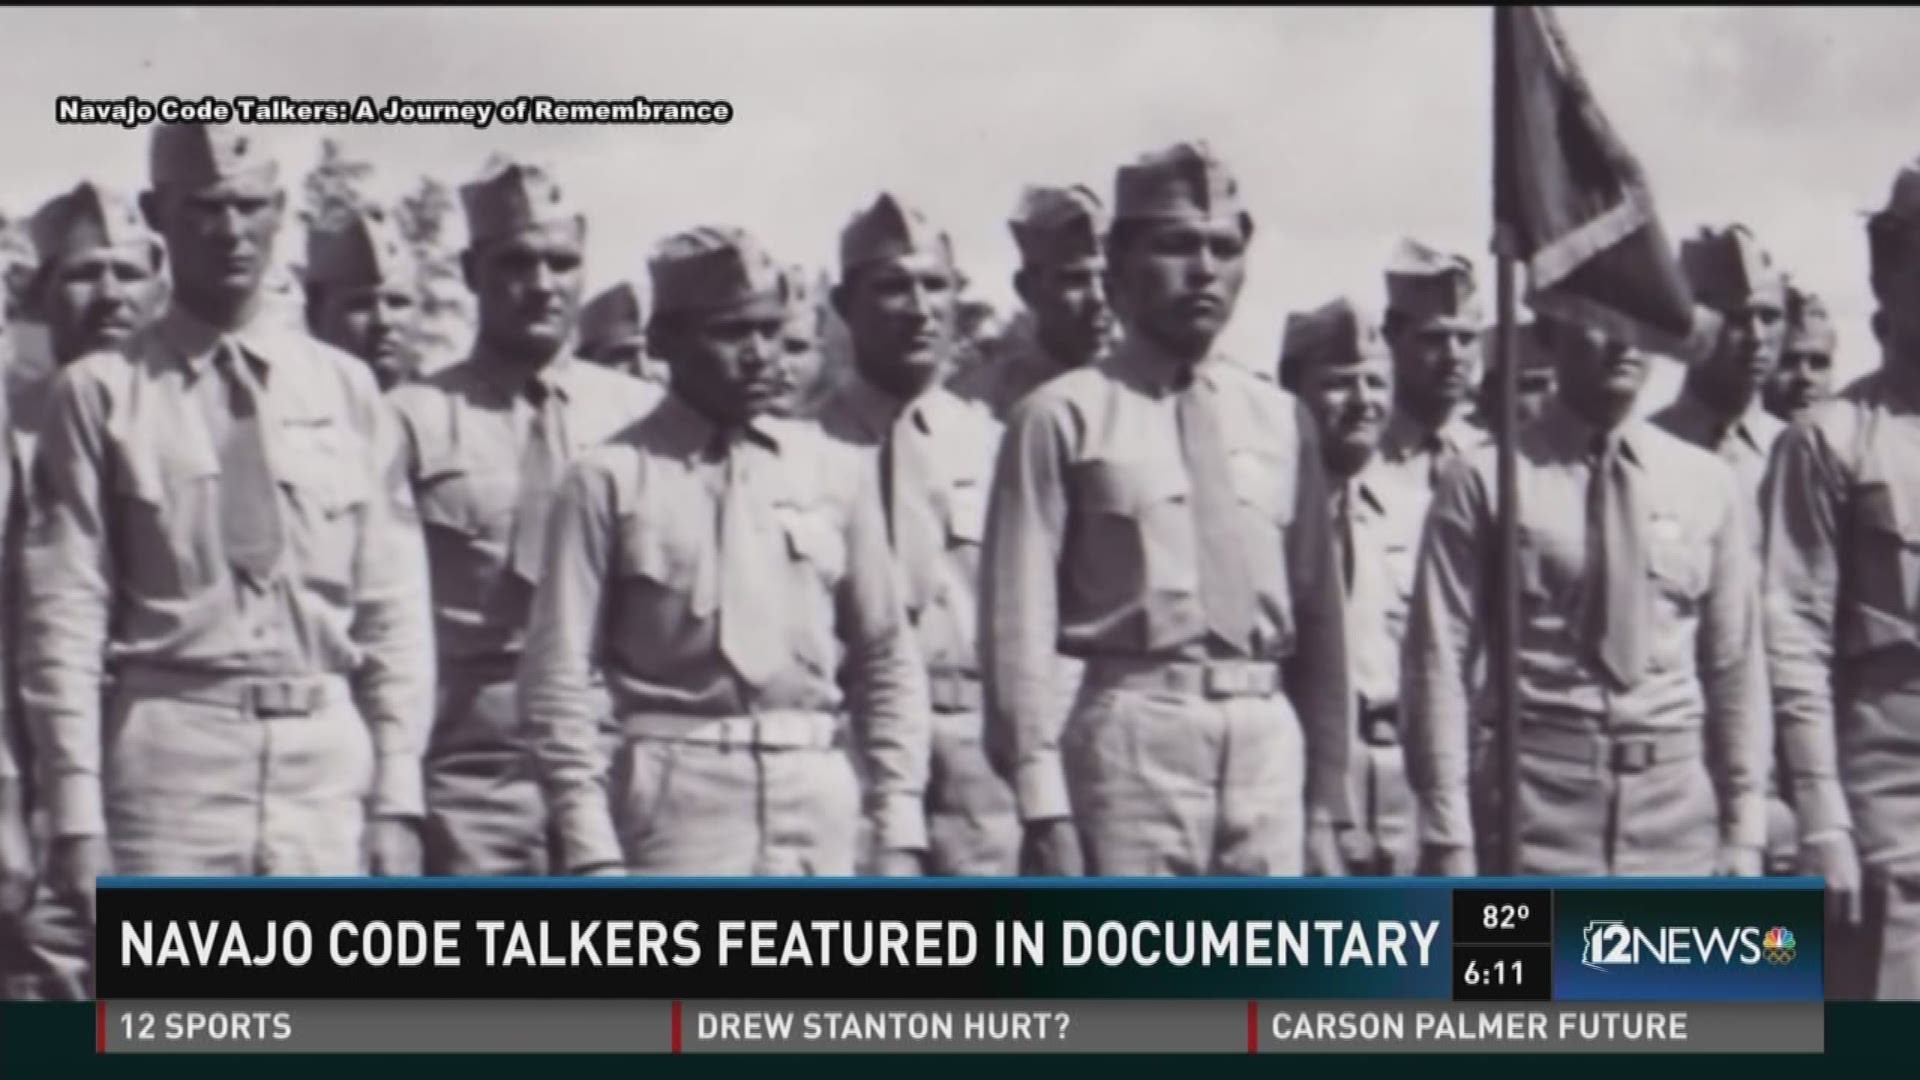 This Veterans Day, we're honoring veterans, including the Navajo Code Talkers, who played a pivotal role in WWII.